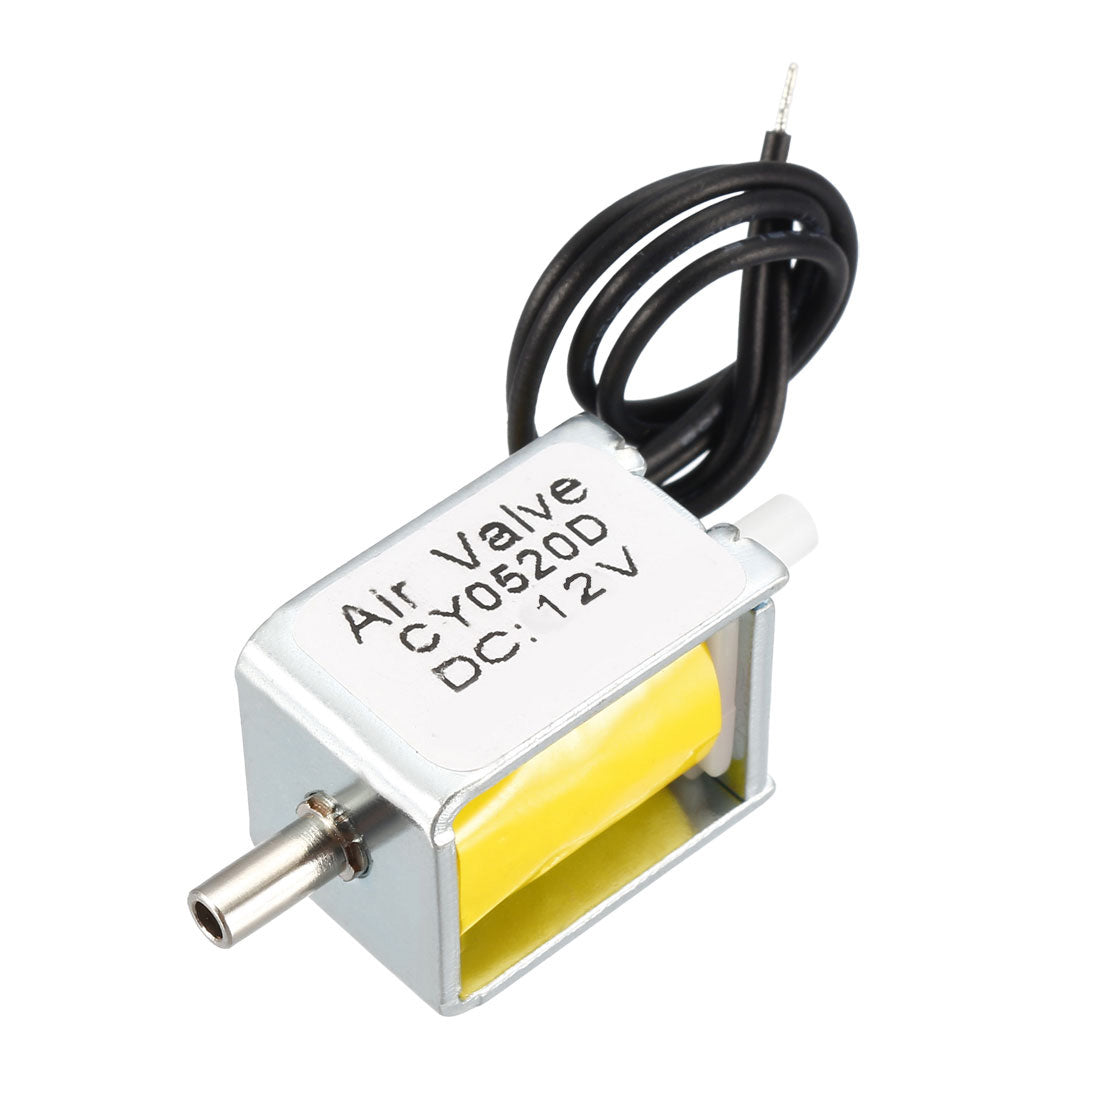 uxcell Uxcell Miniature Solenoid Valve 2 Way Normally Closed DC12V 0.2A Air Solenoid Valve